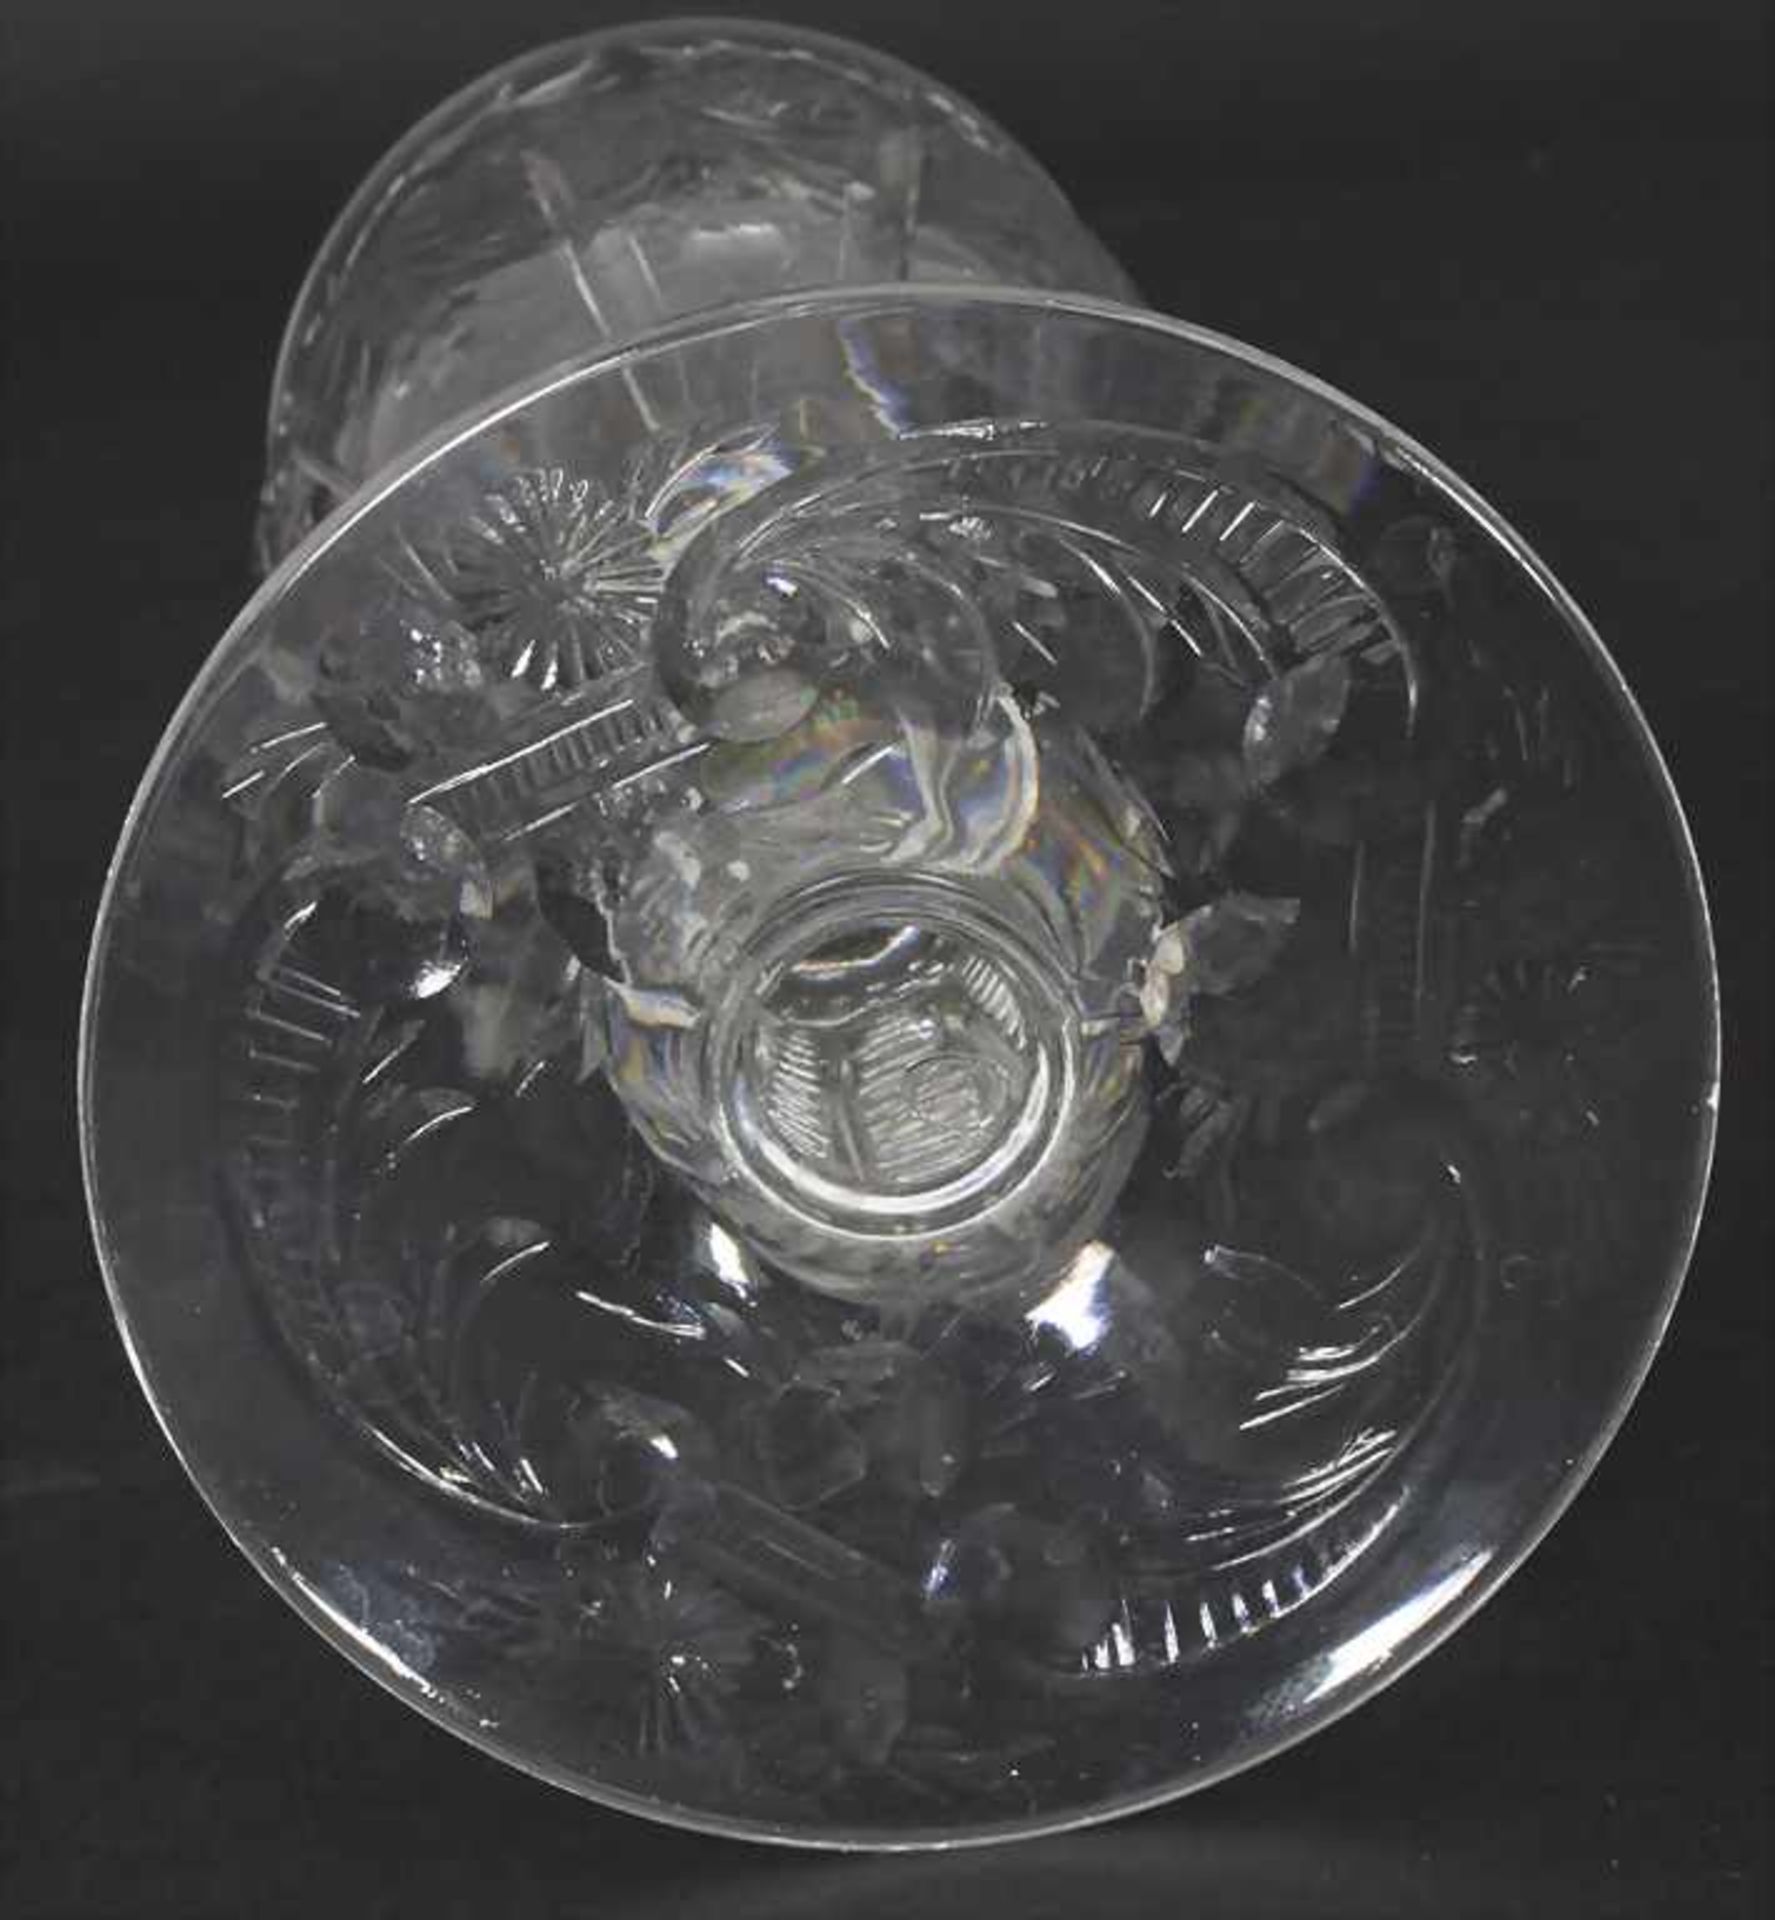 Weinglas / A wine glass, Frankreich, 19. Jh. - Image 3 of 6